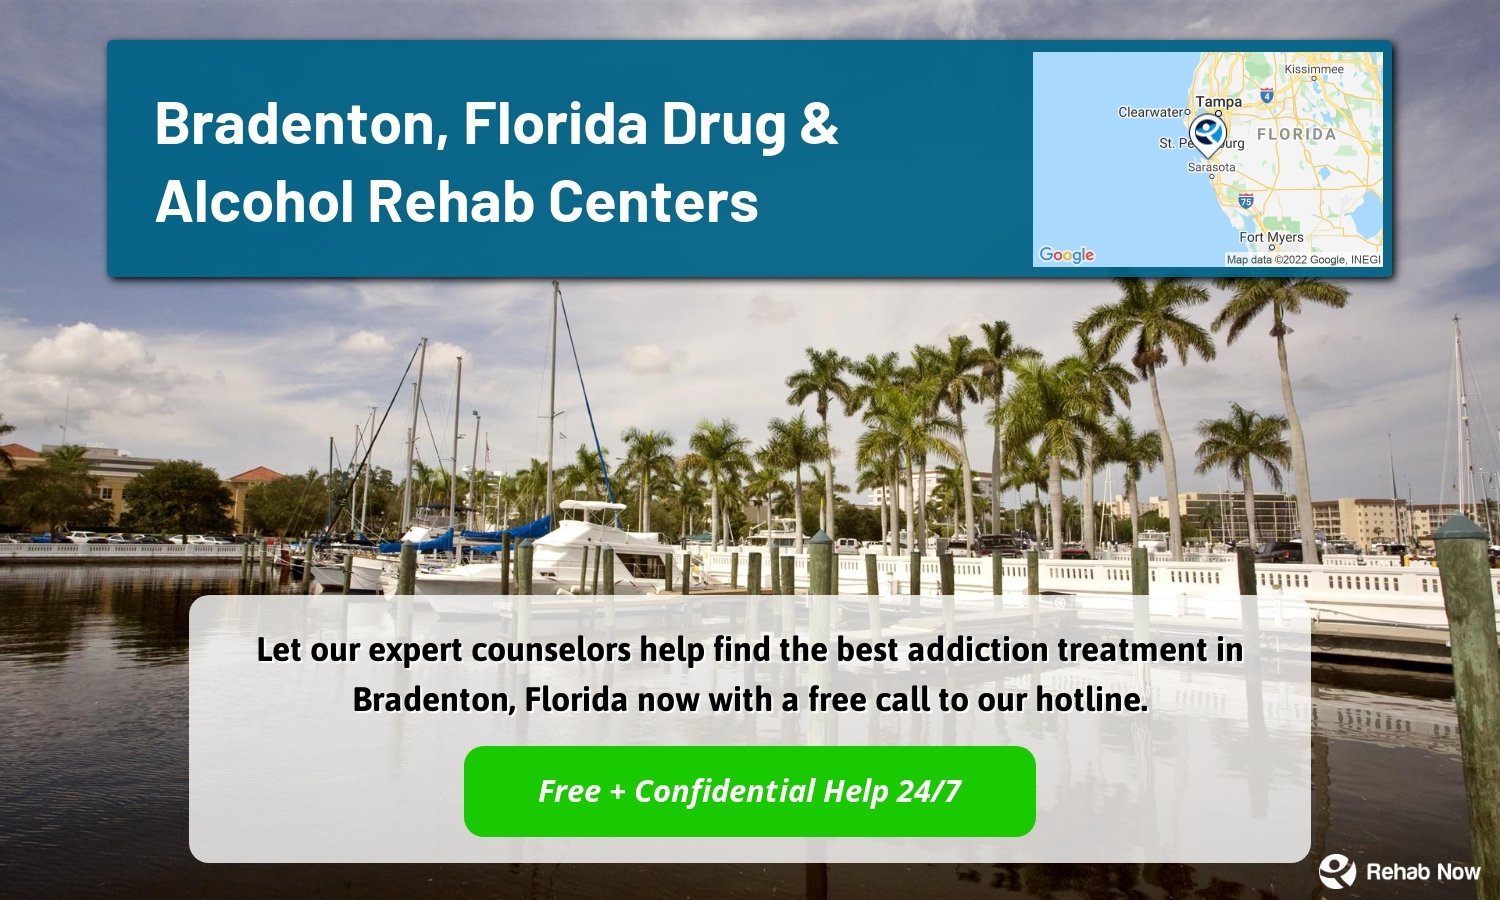 Let our expert counselors help find the best addiction treatment in Bradenton, Florida now with a free call to our hotline.